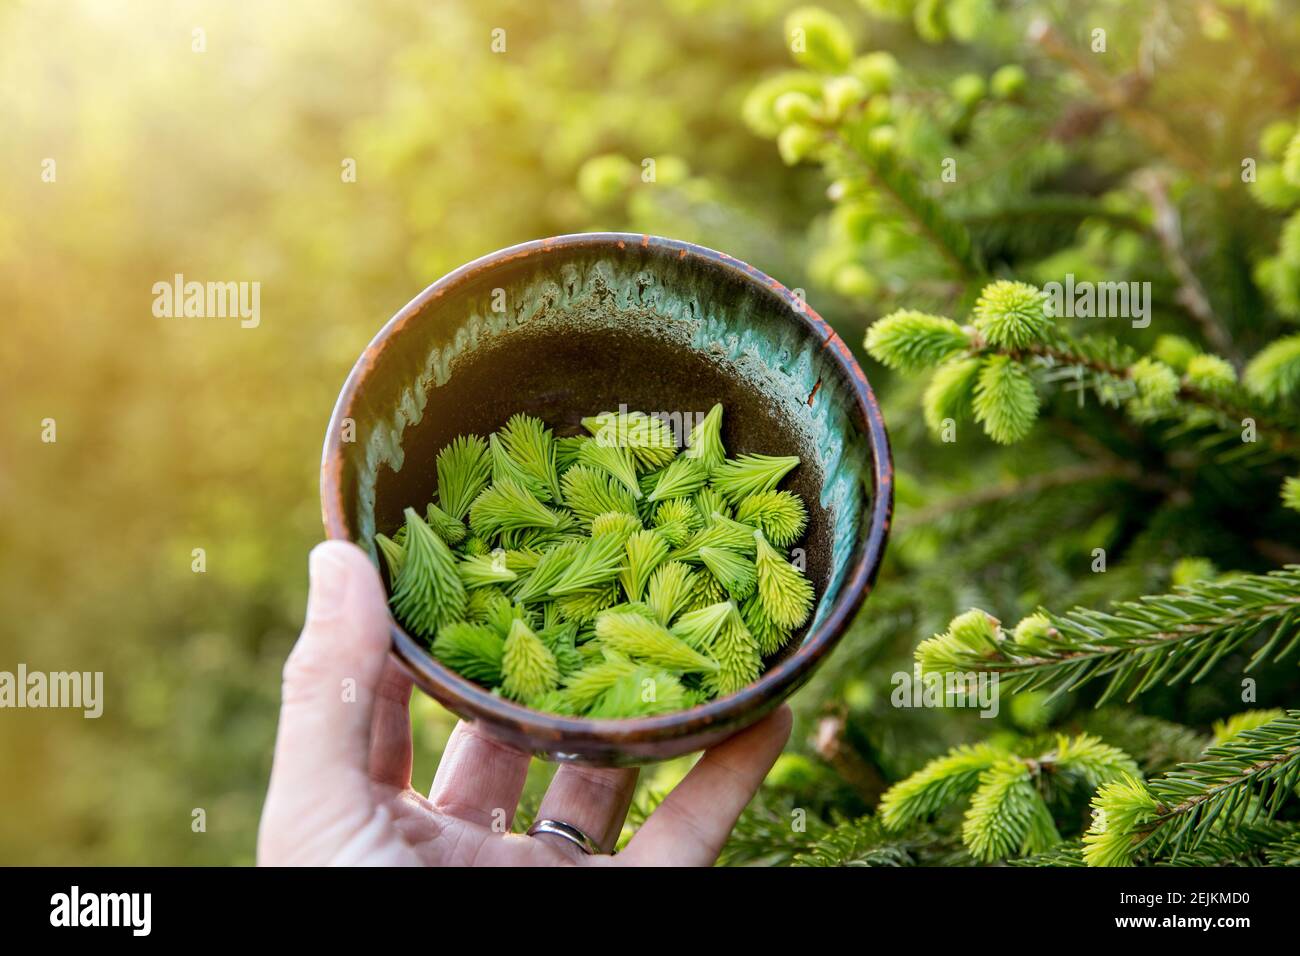 Picked spruce tree Picea fresh tips in spring outdoors from growing spruce tree. Food and herbal medicine ingredients. Stock Photo